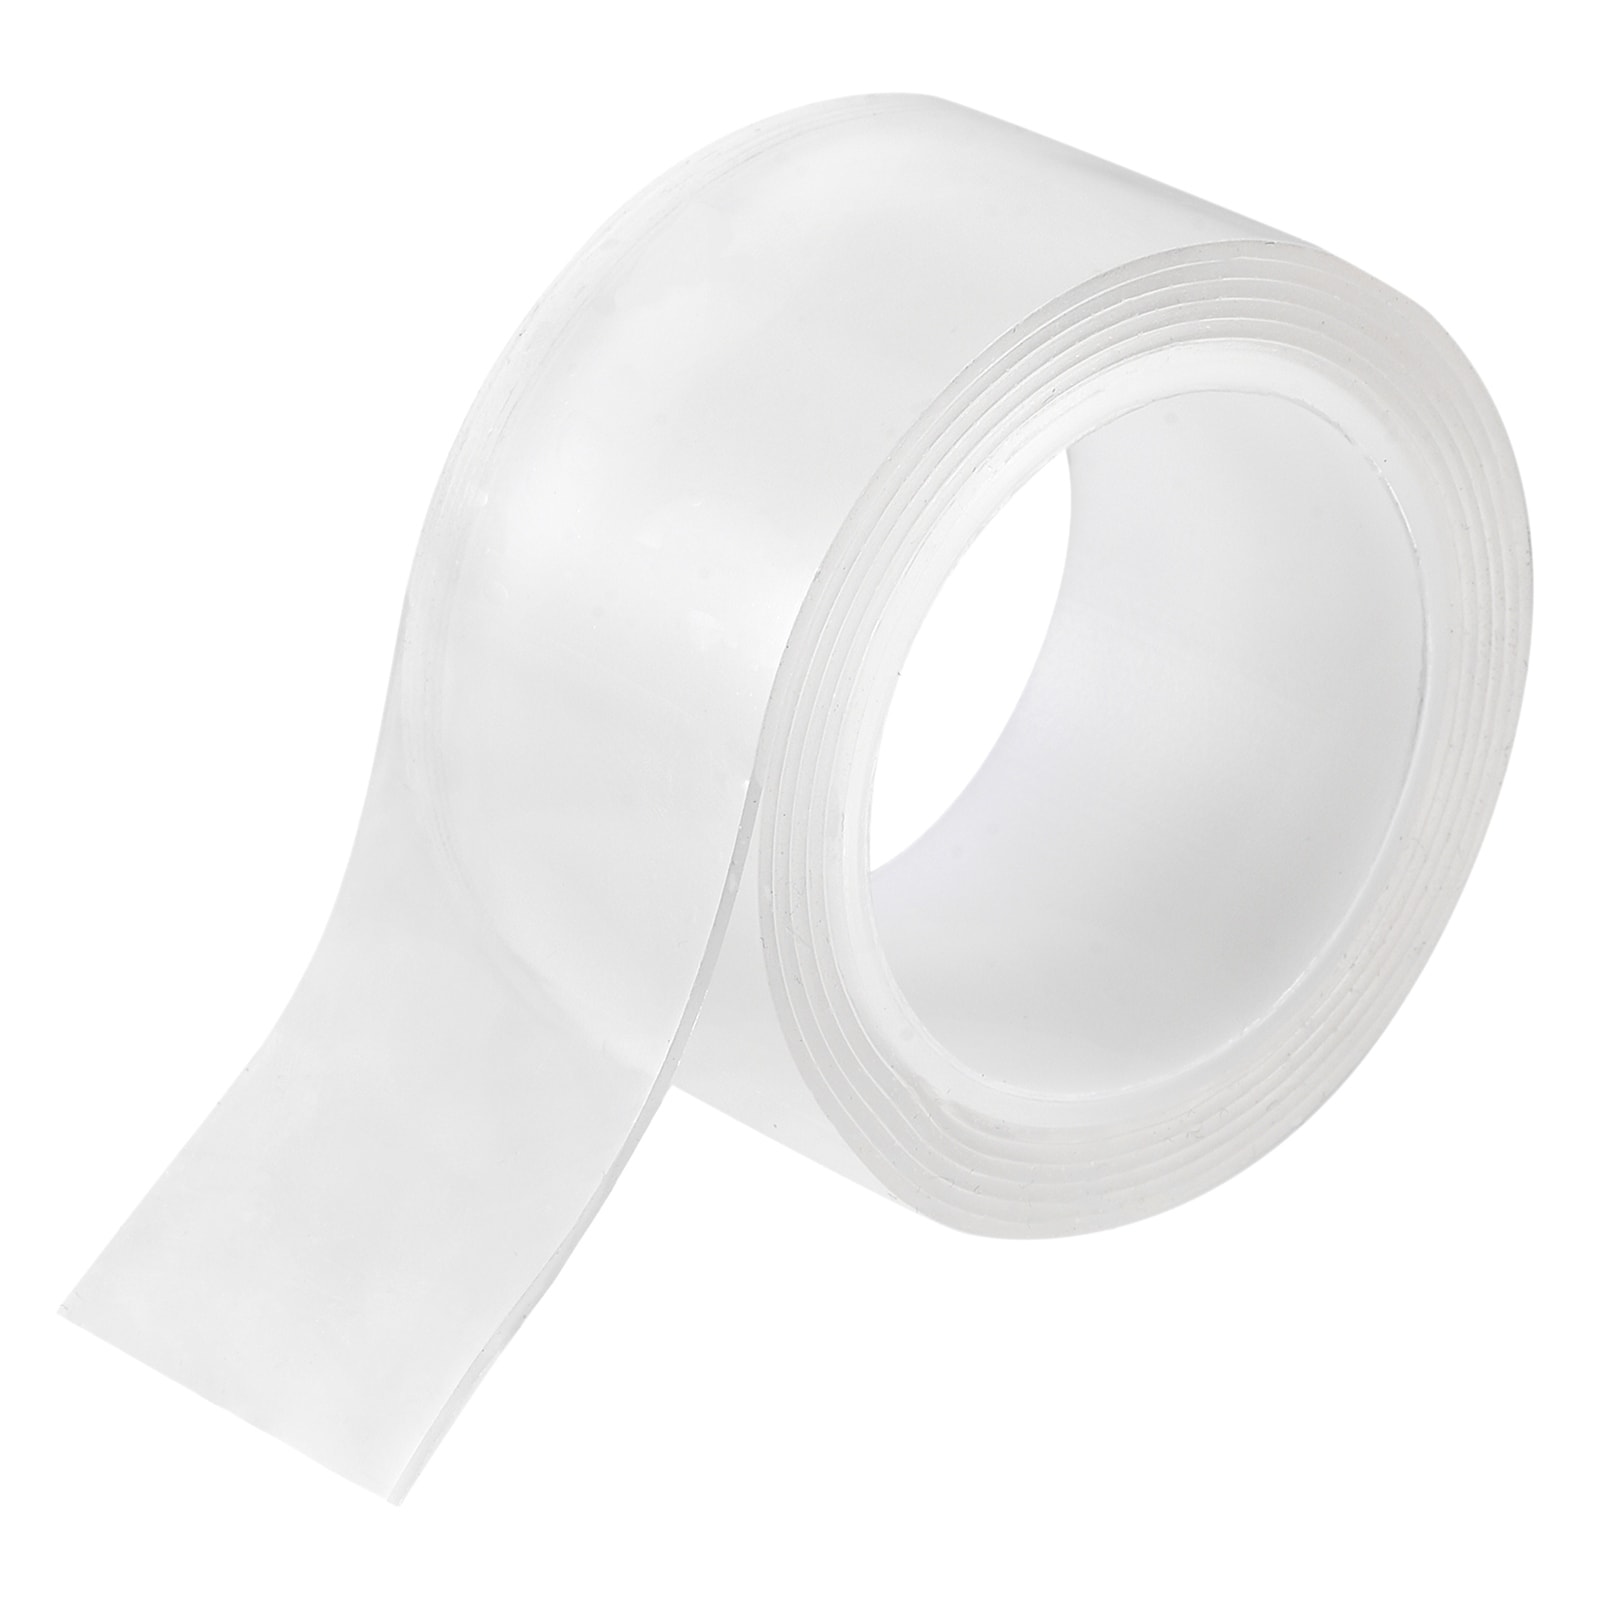 Double Sided Tape-1000x30x1mm Strong Adhesive Tape for Wall, 2Pcs Tape -  Transparent - Bed Bath & Beyond - 36550064